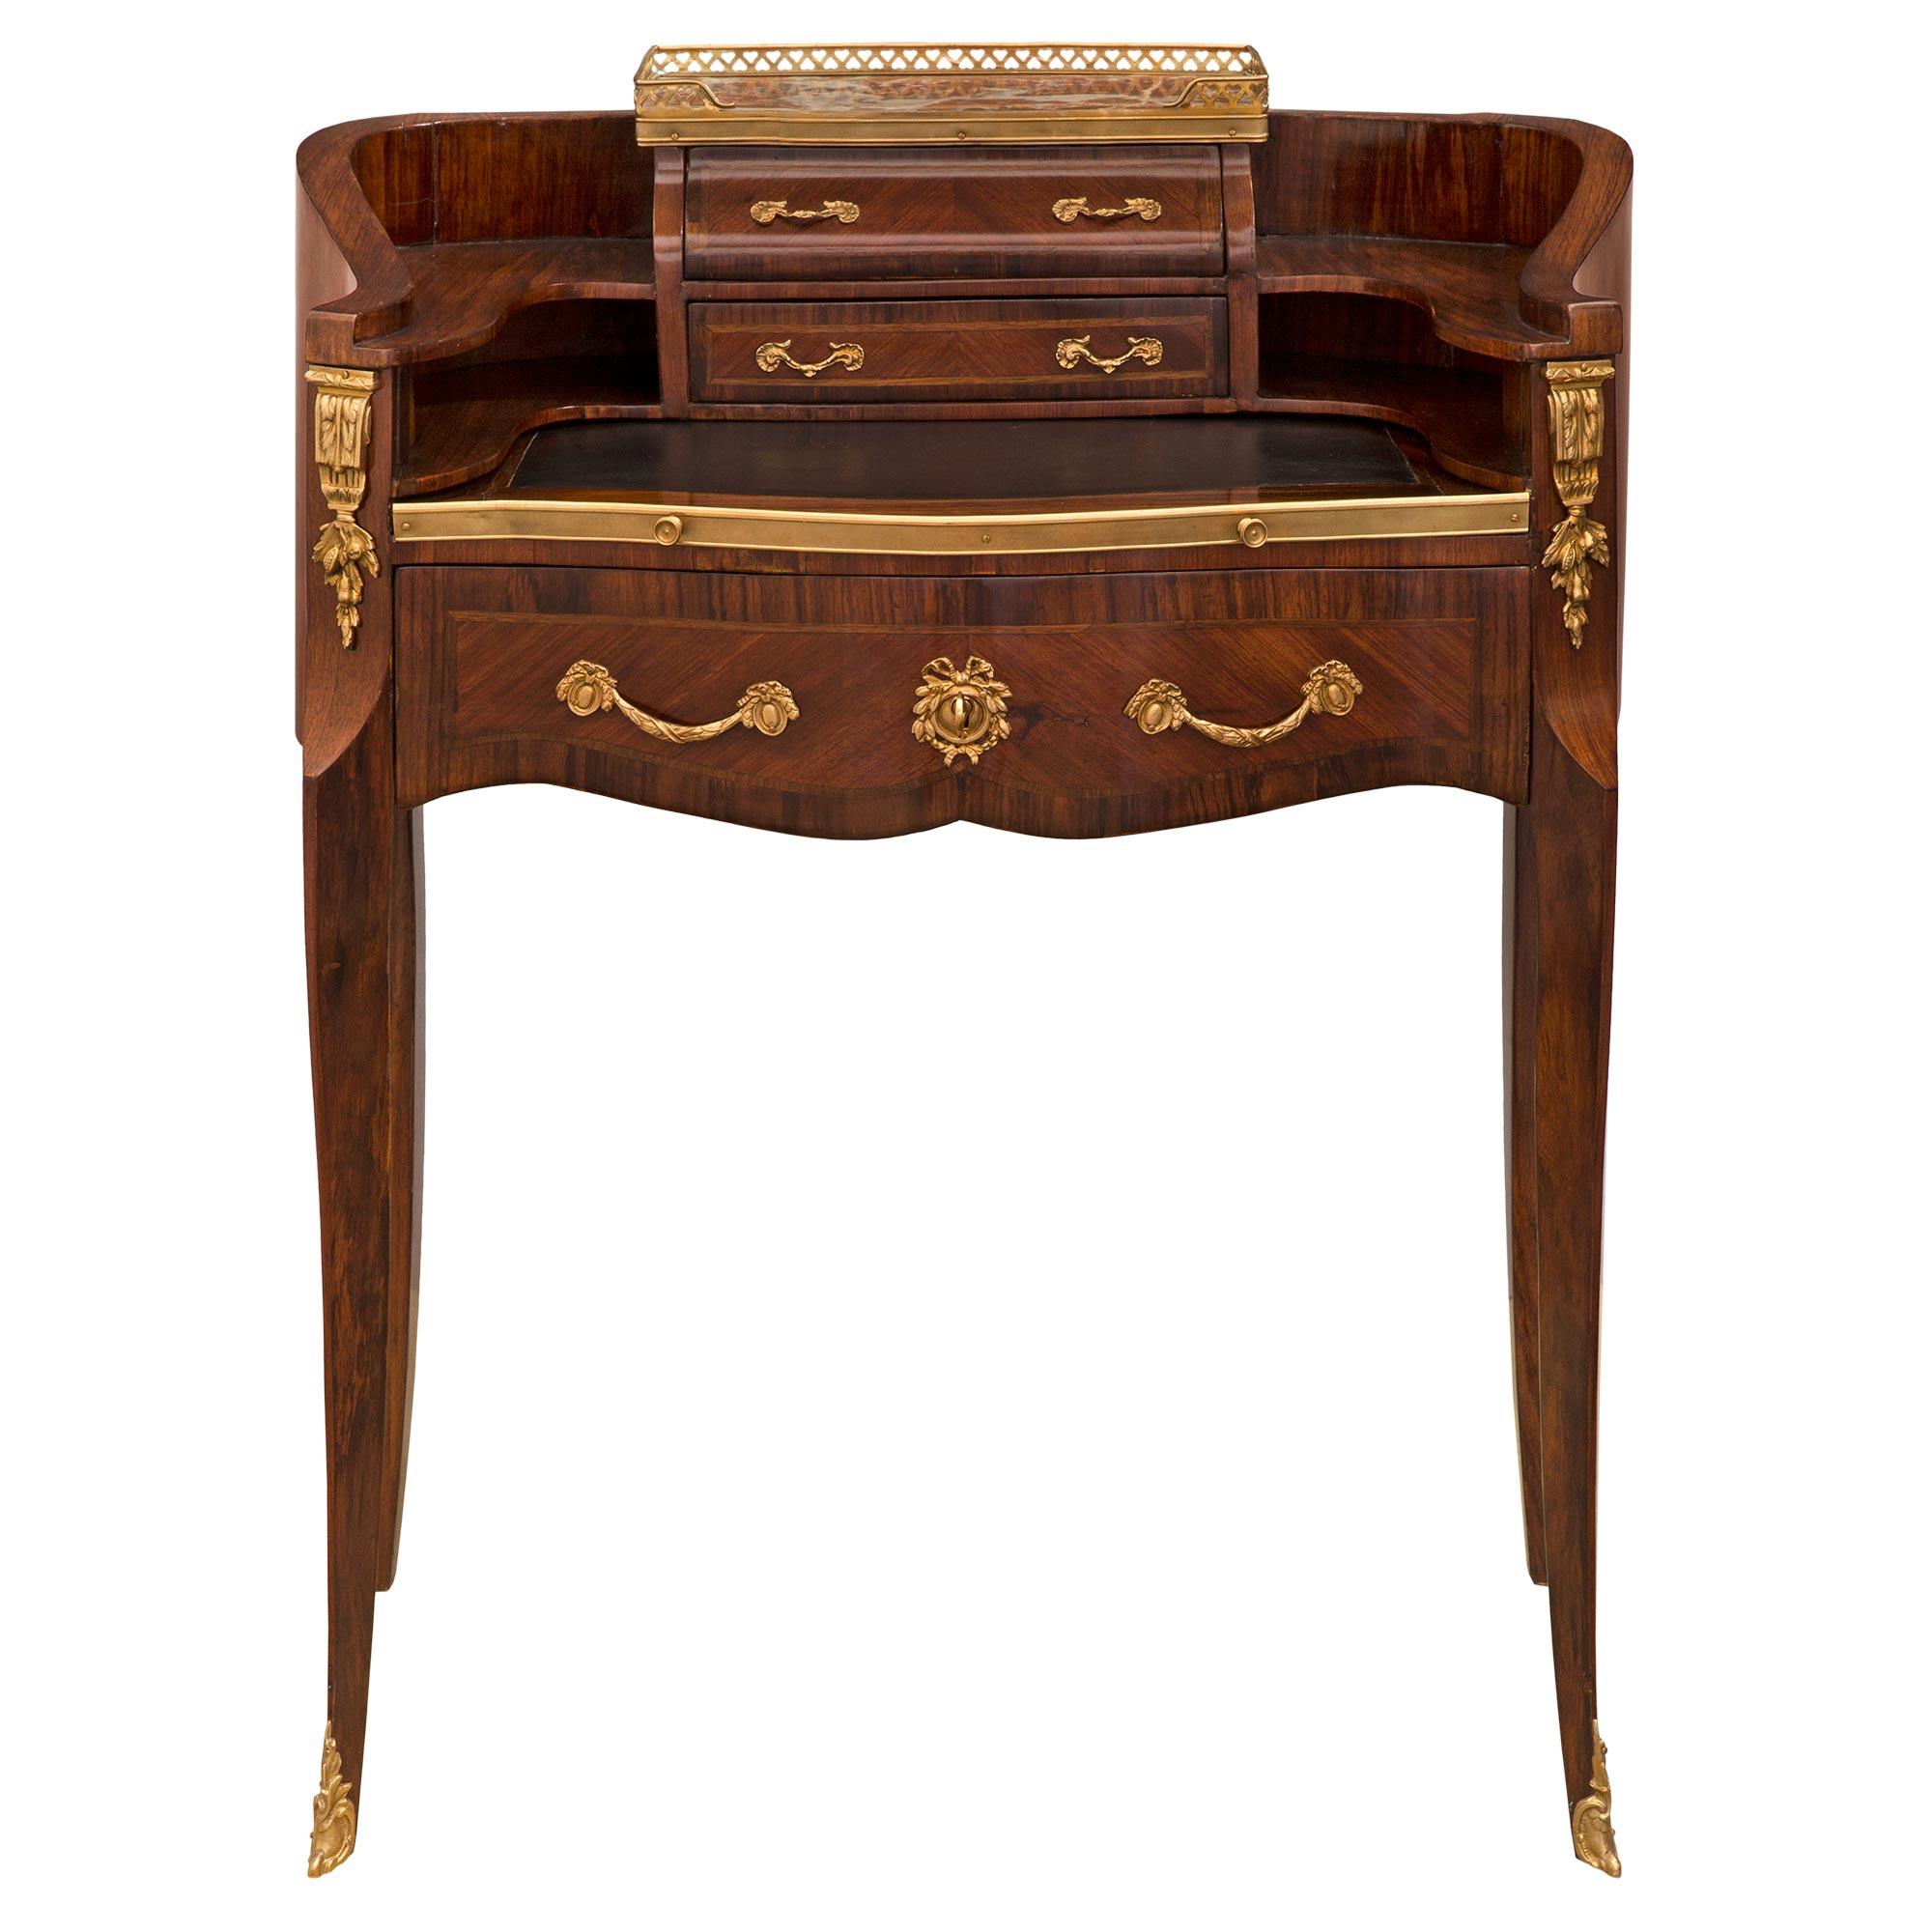 French 19th Century Transitional St. Kingwood, Tulipwood and Ormolu Desk For Sale